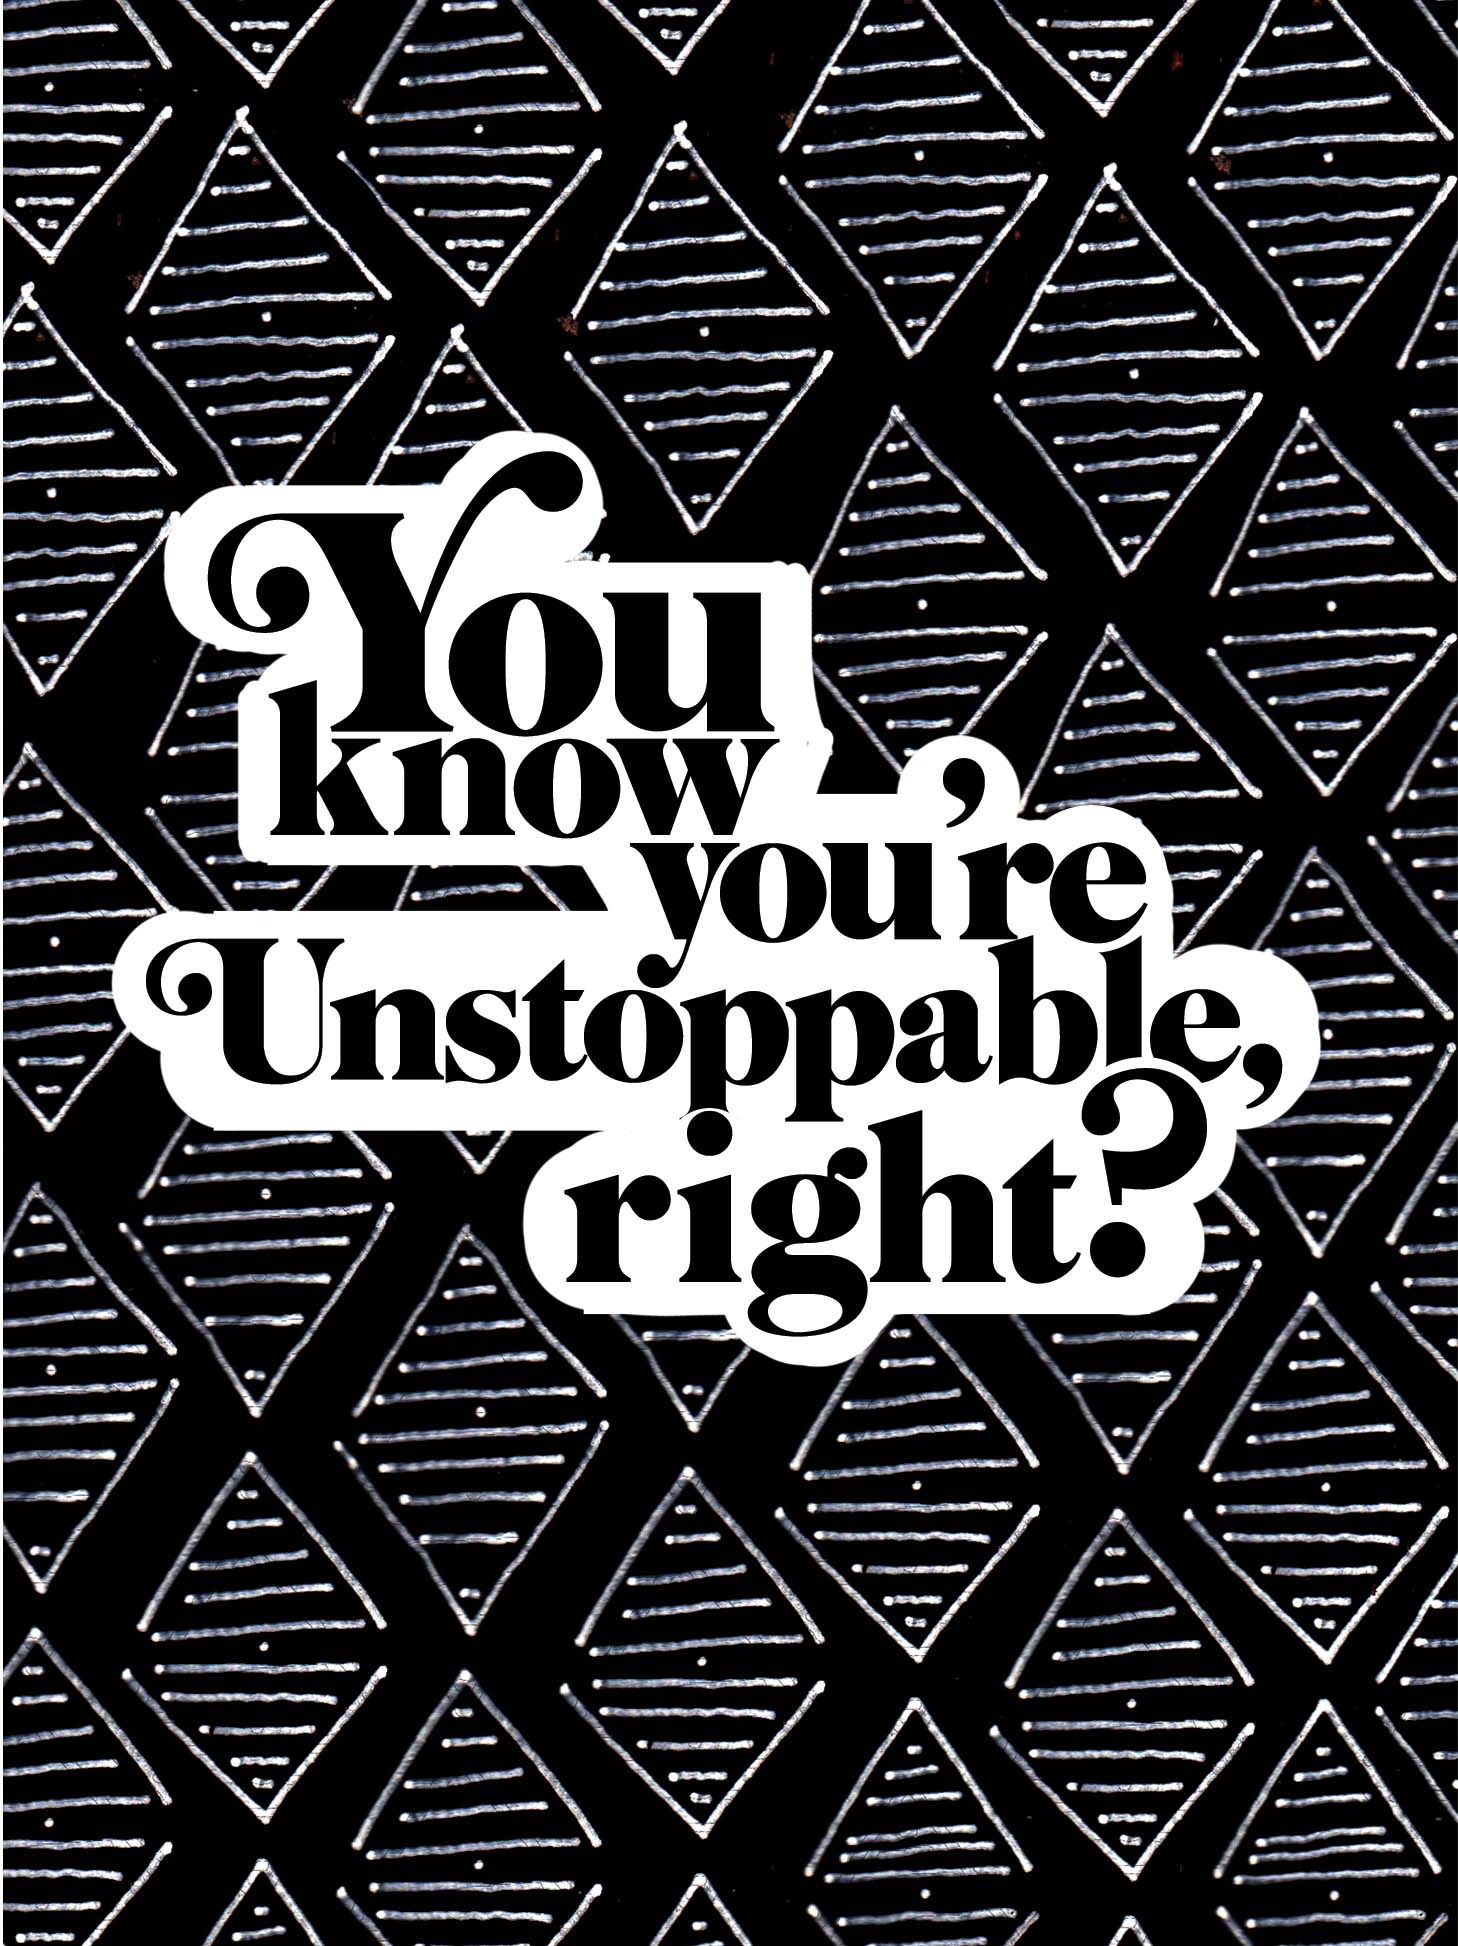 You Know You're Unstoppable, Right? - Greeting Card